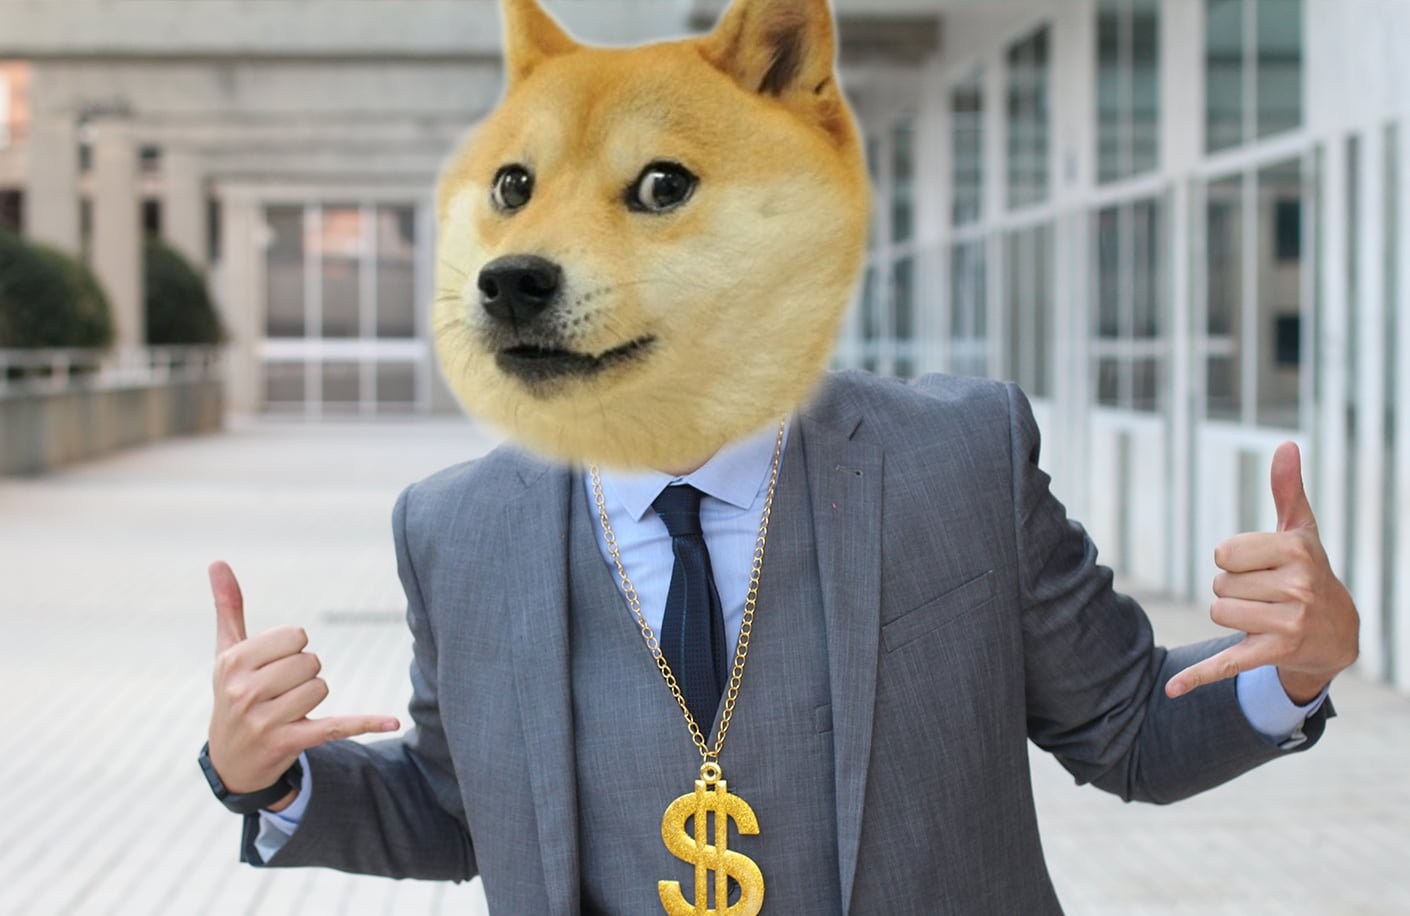 Elon Musk puts the Dogecoin symbol in his Twitter profile 7